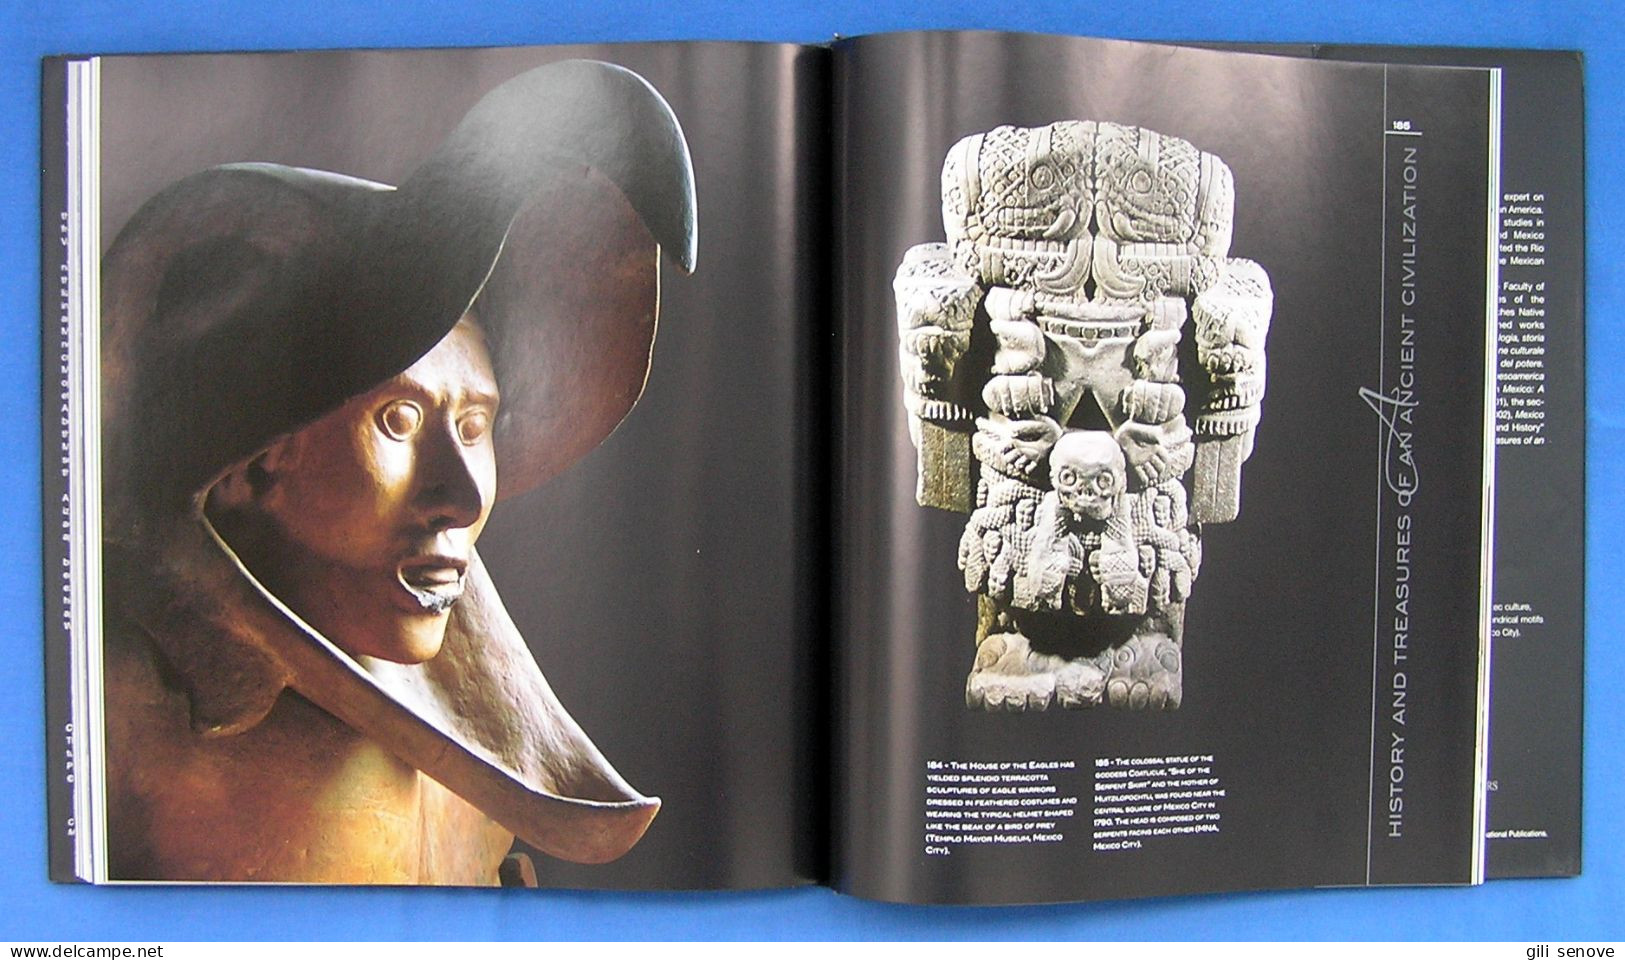 The Aztecs: History and Treasures of an Ancient Civilization 2007